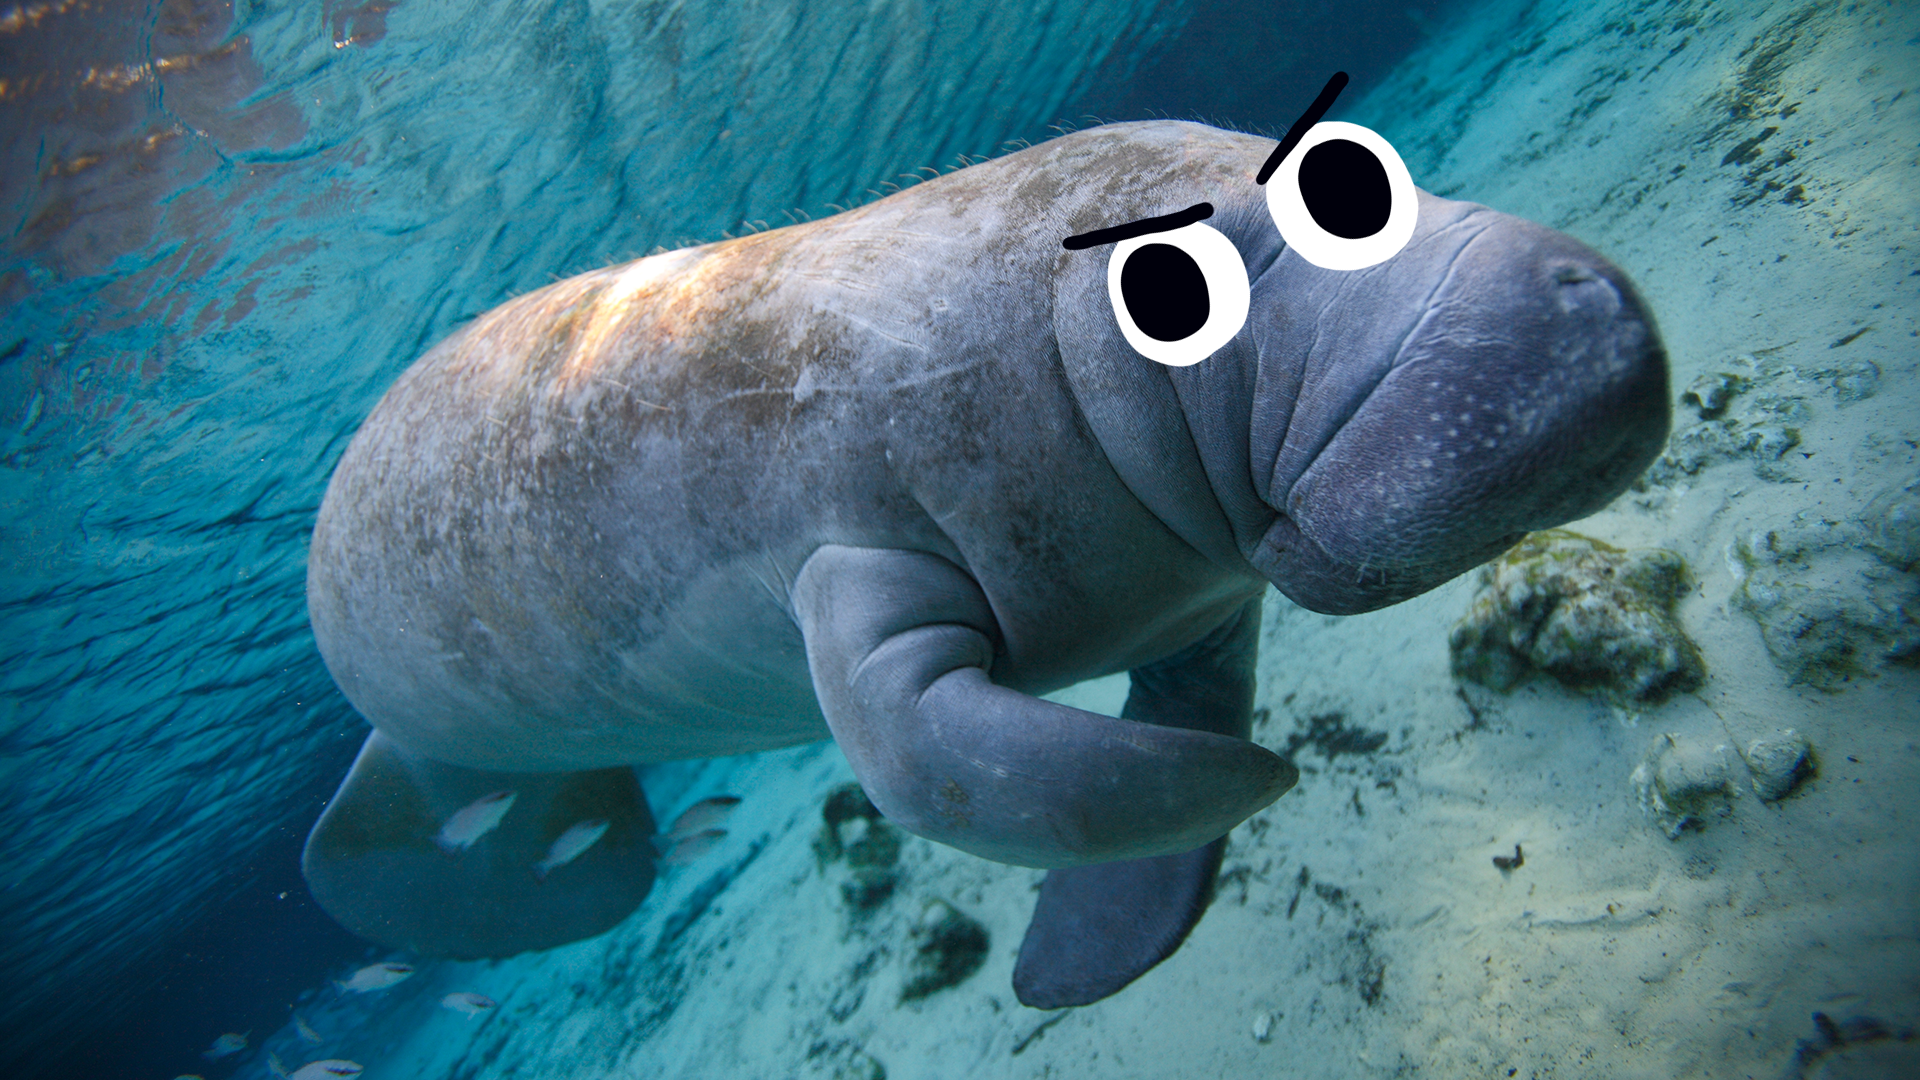 A manatee floating in the sea